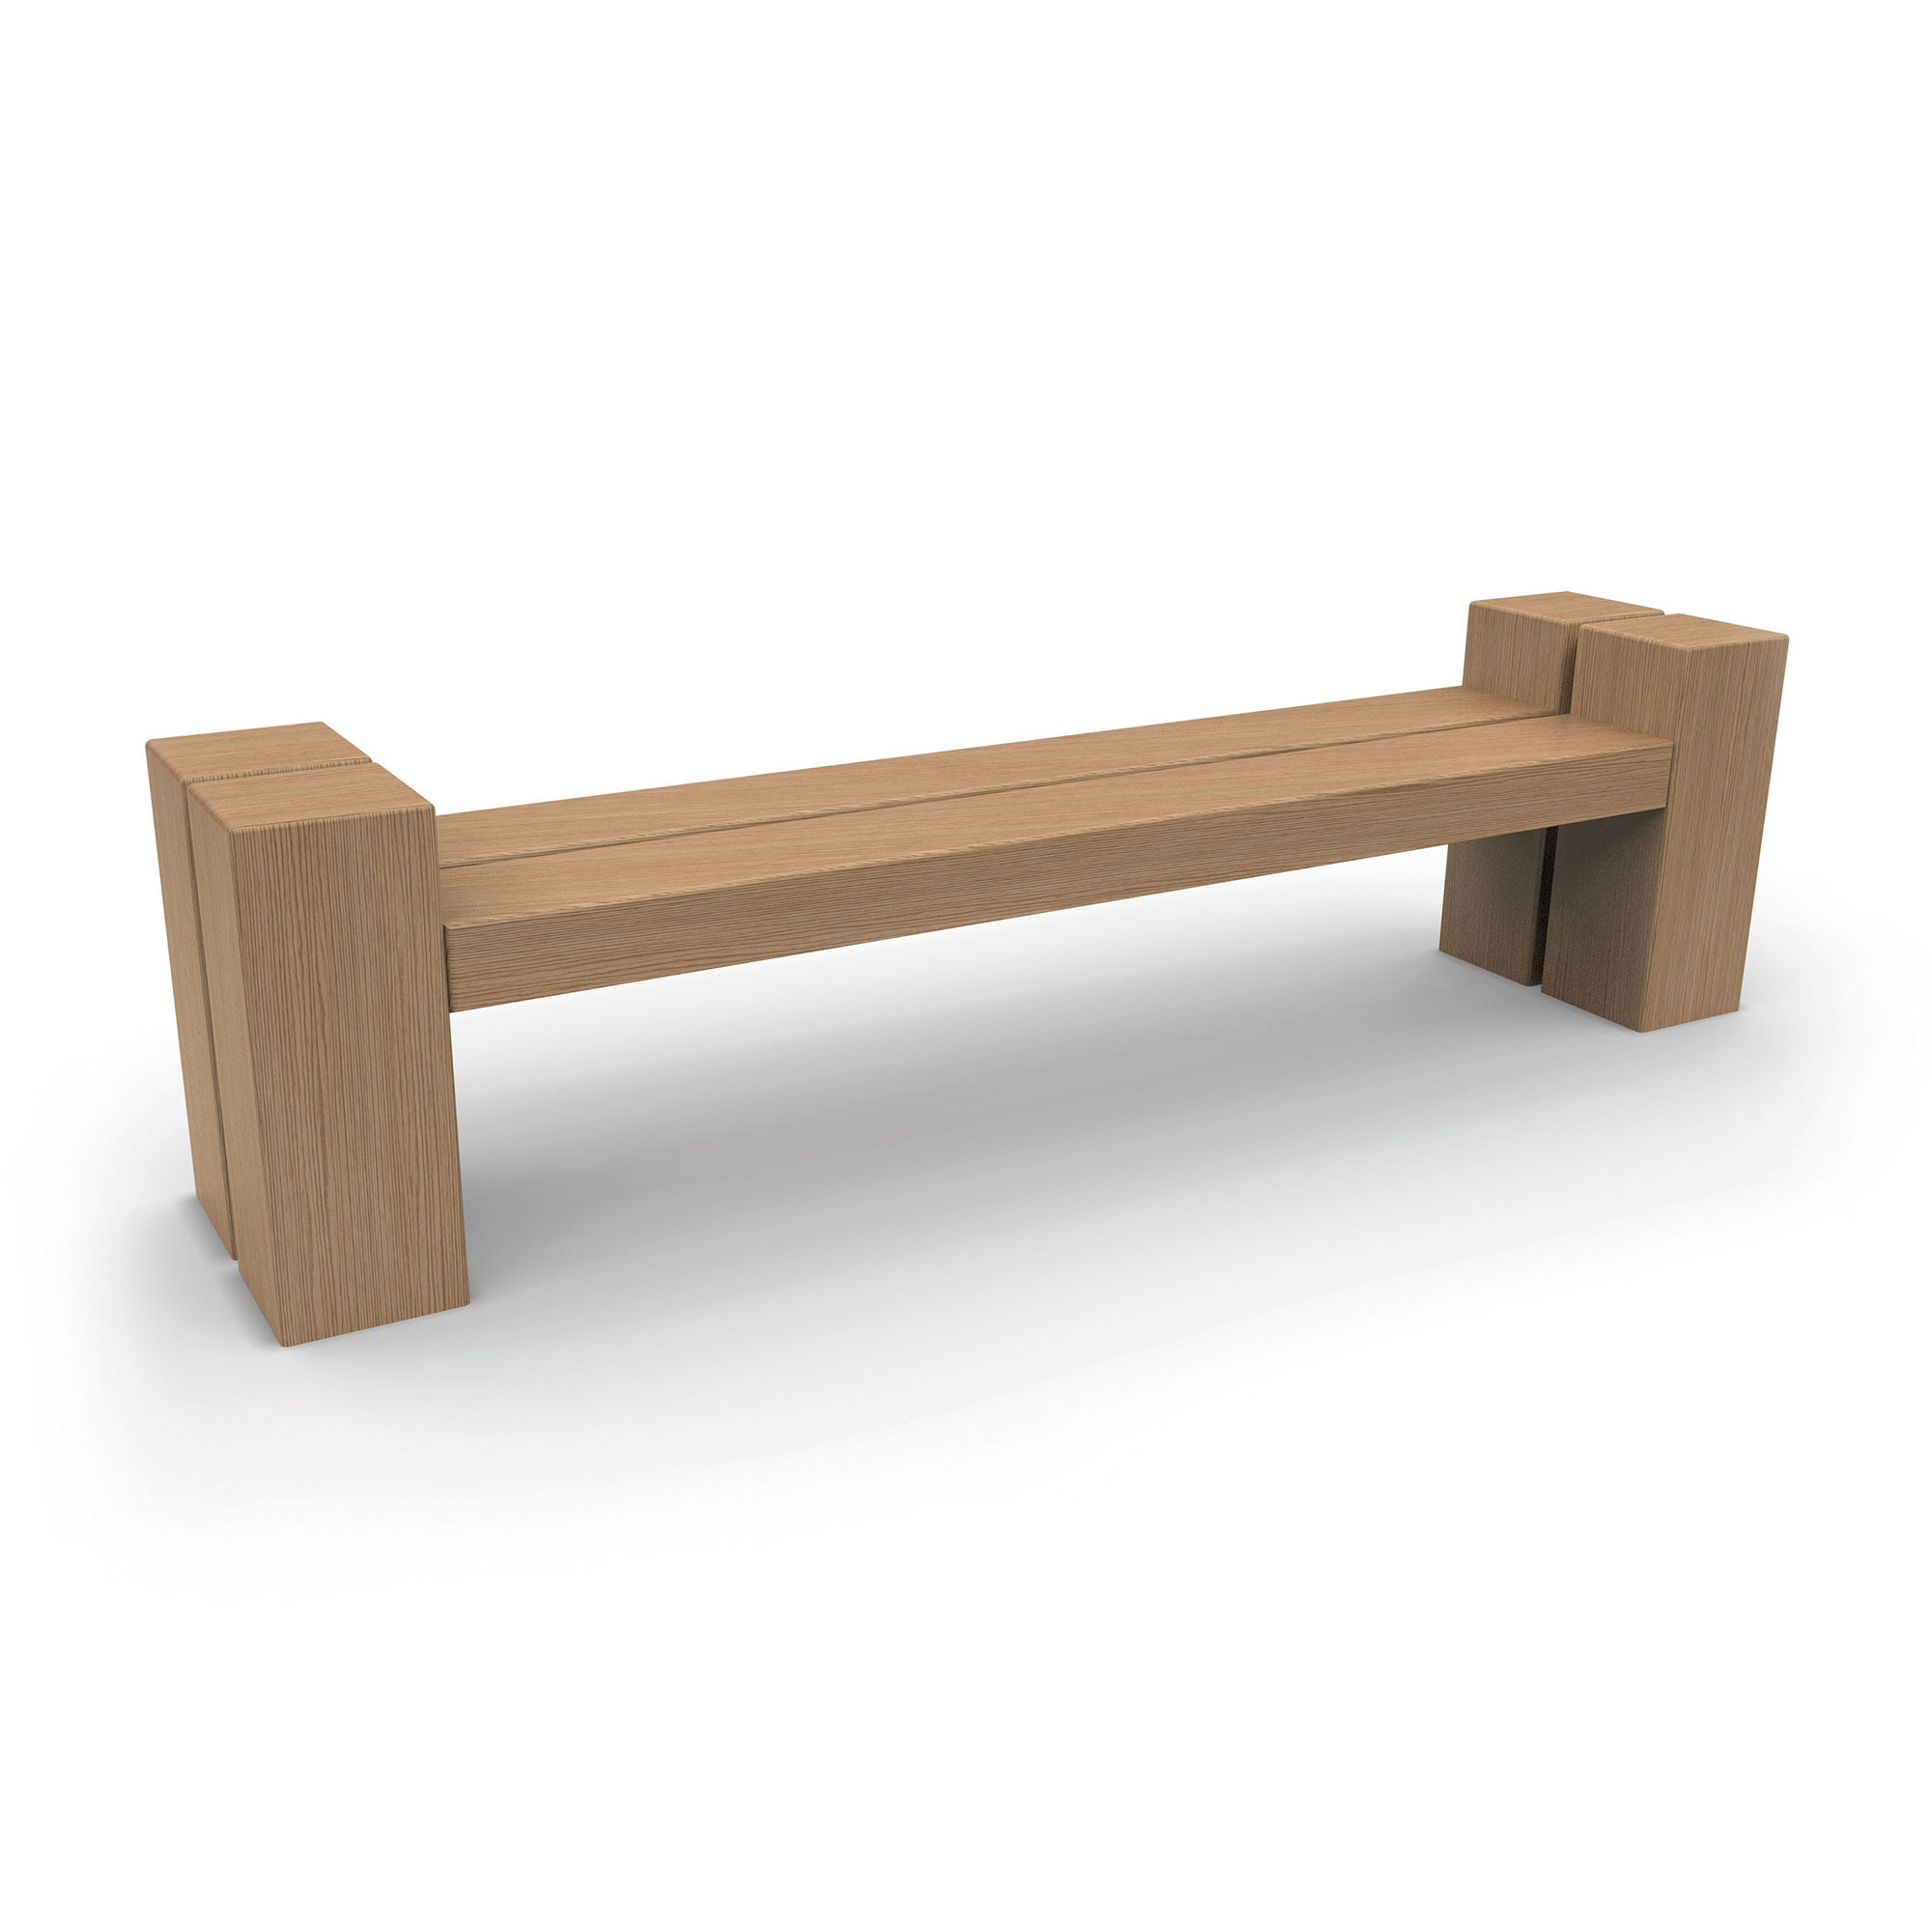 Type 1 Backless Bench